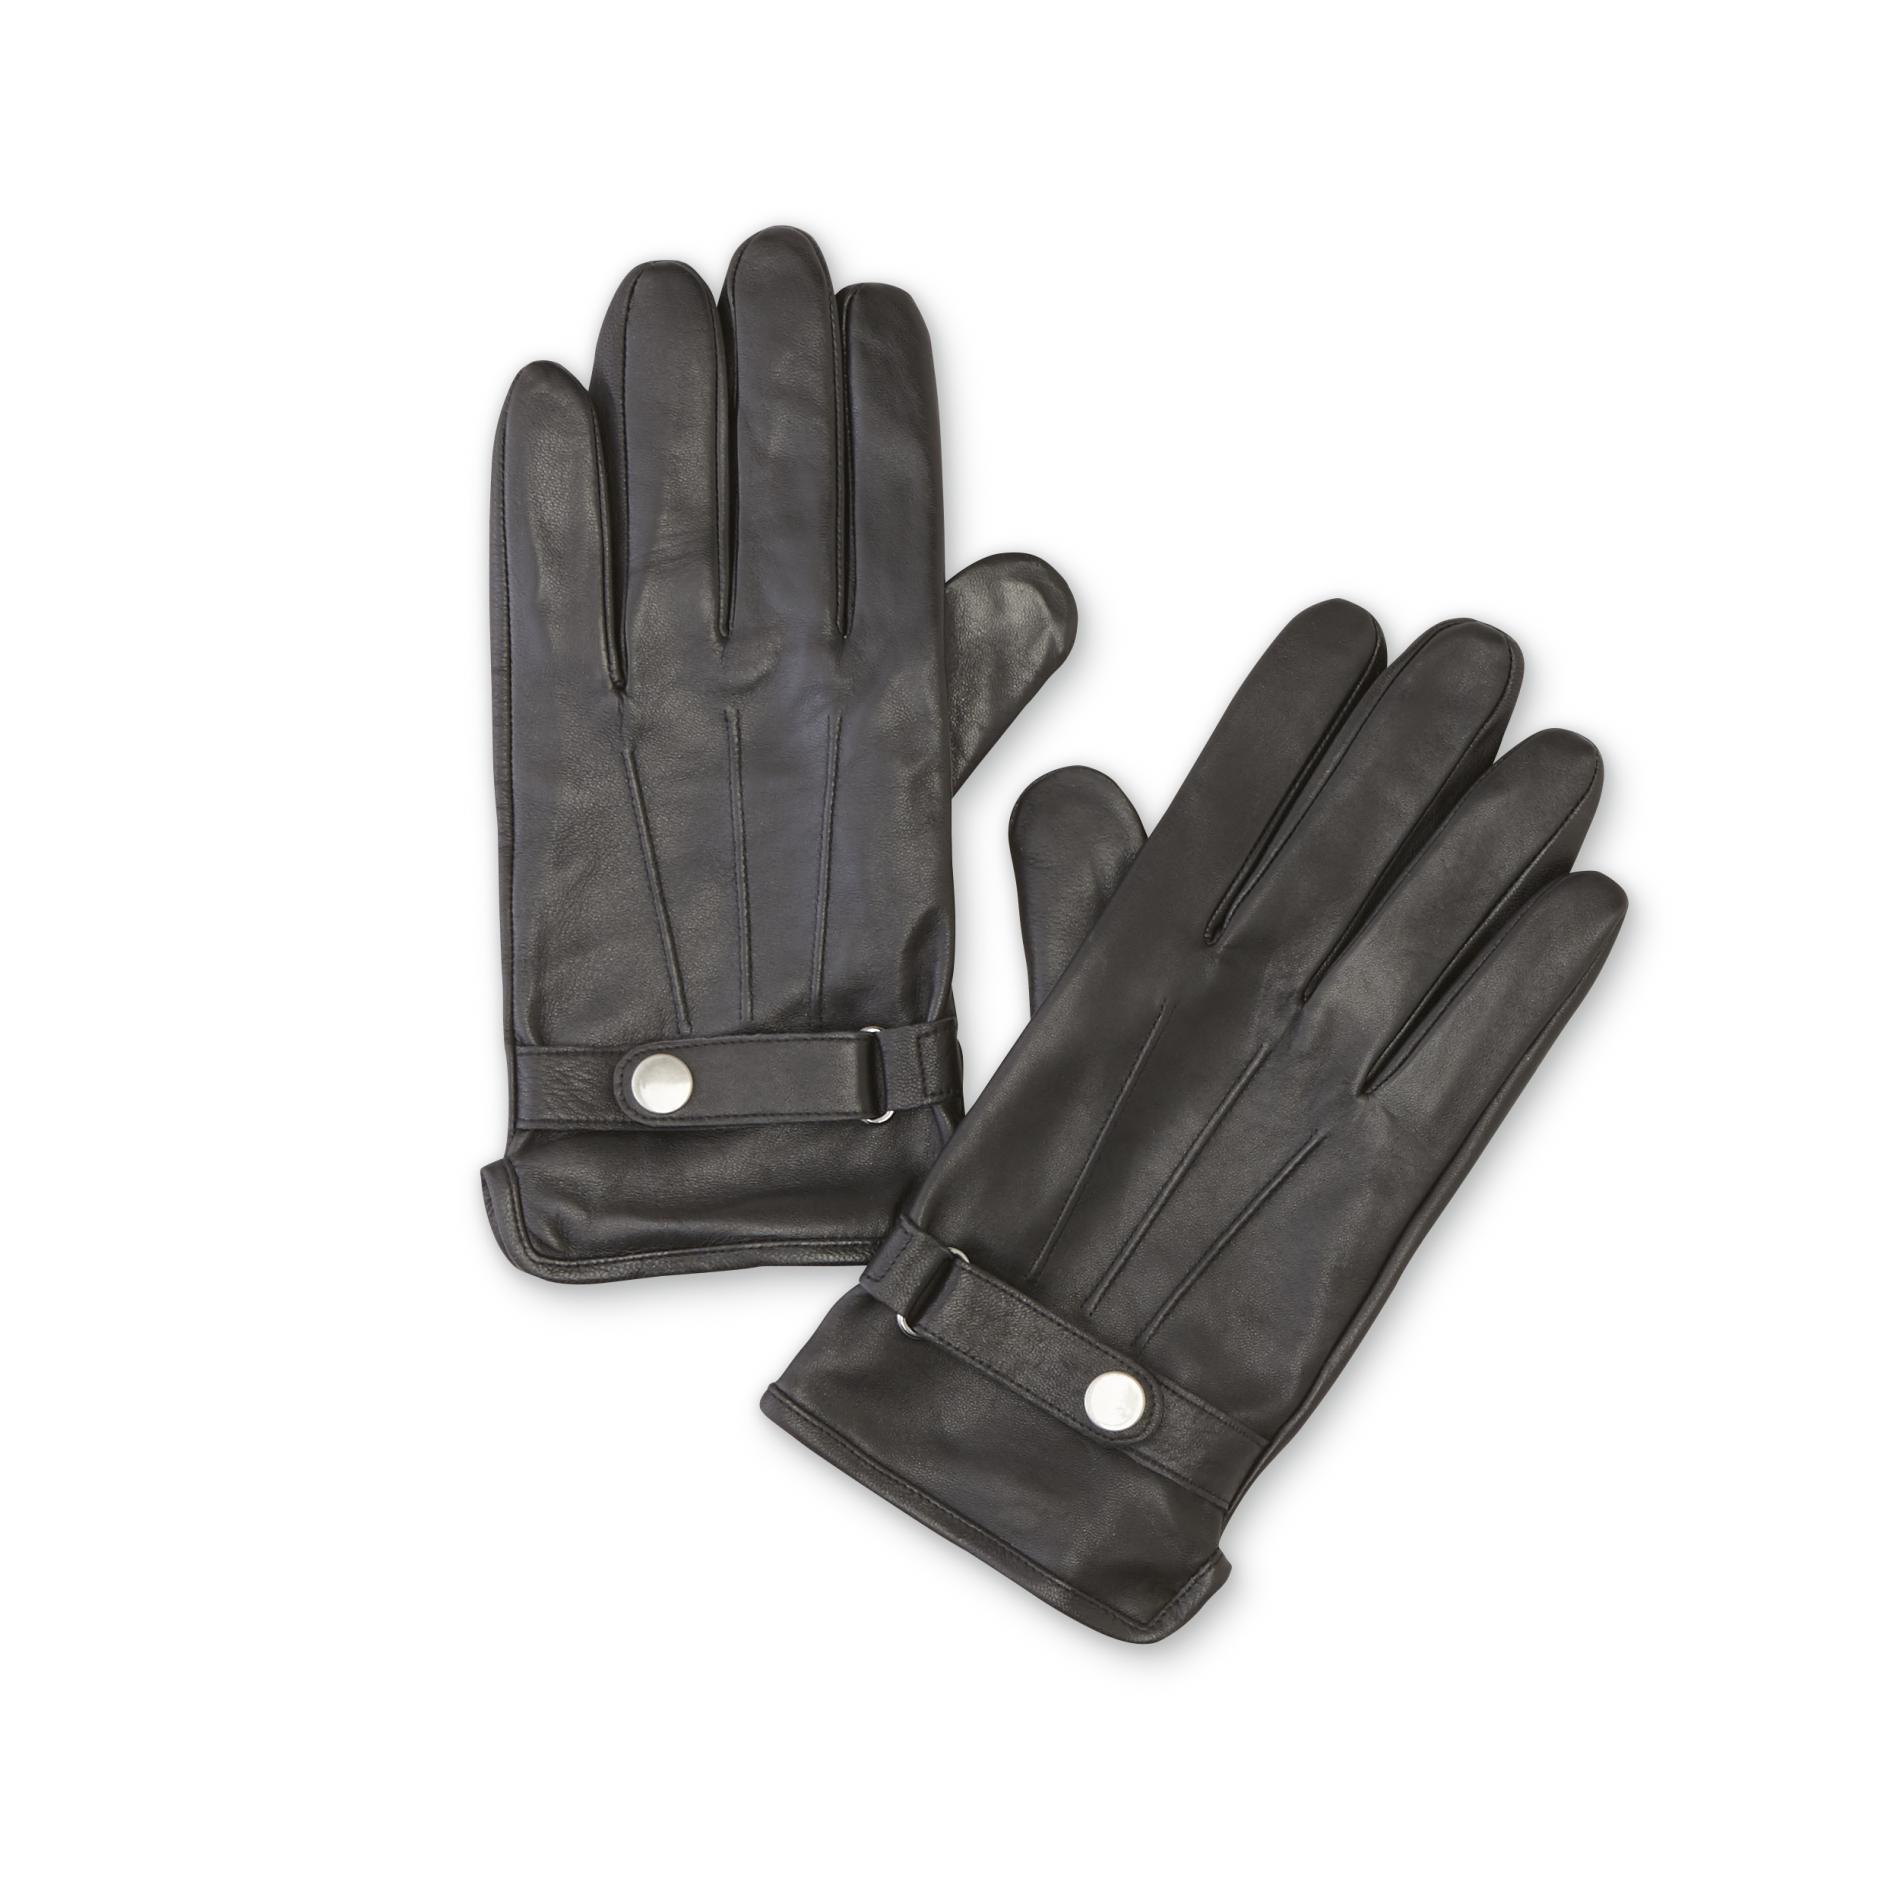 Simply Styled Men's Leather Gloves